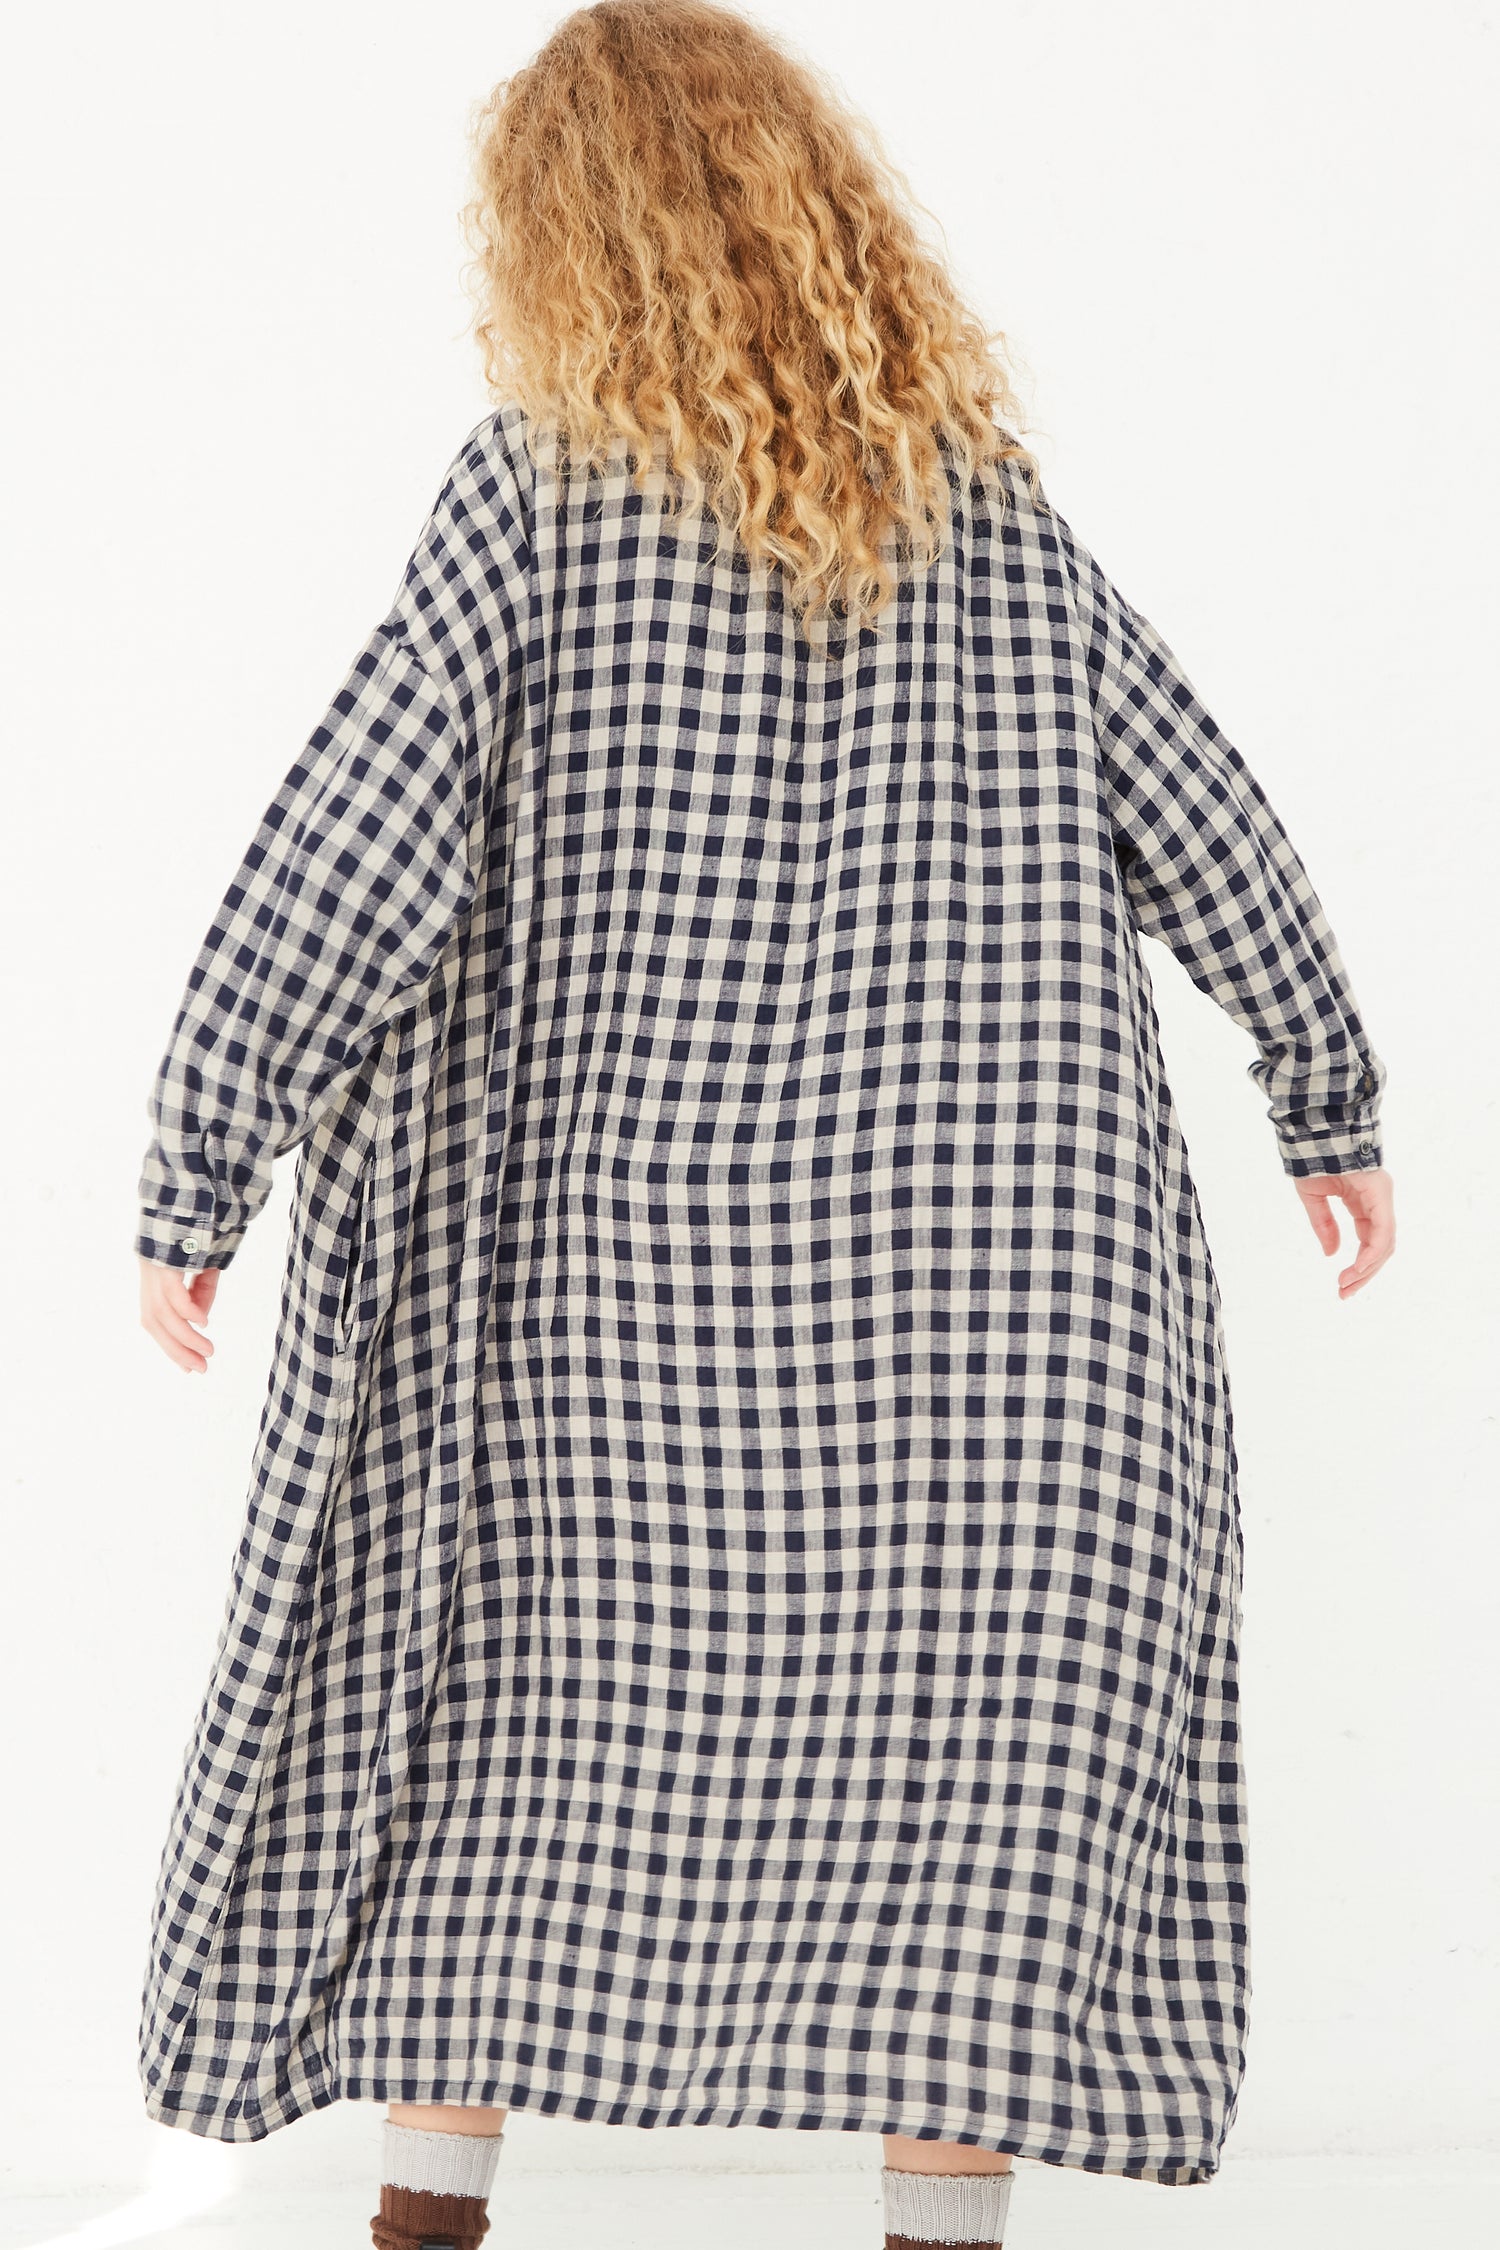 A woman wearing an Azumadaki Linen Gingham Dress in Beige by Ichi Antiquités, a relaxed fit, long sleeve dress in a blue and white checkered pattern.